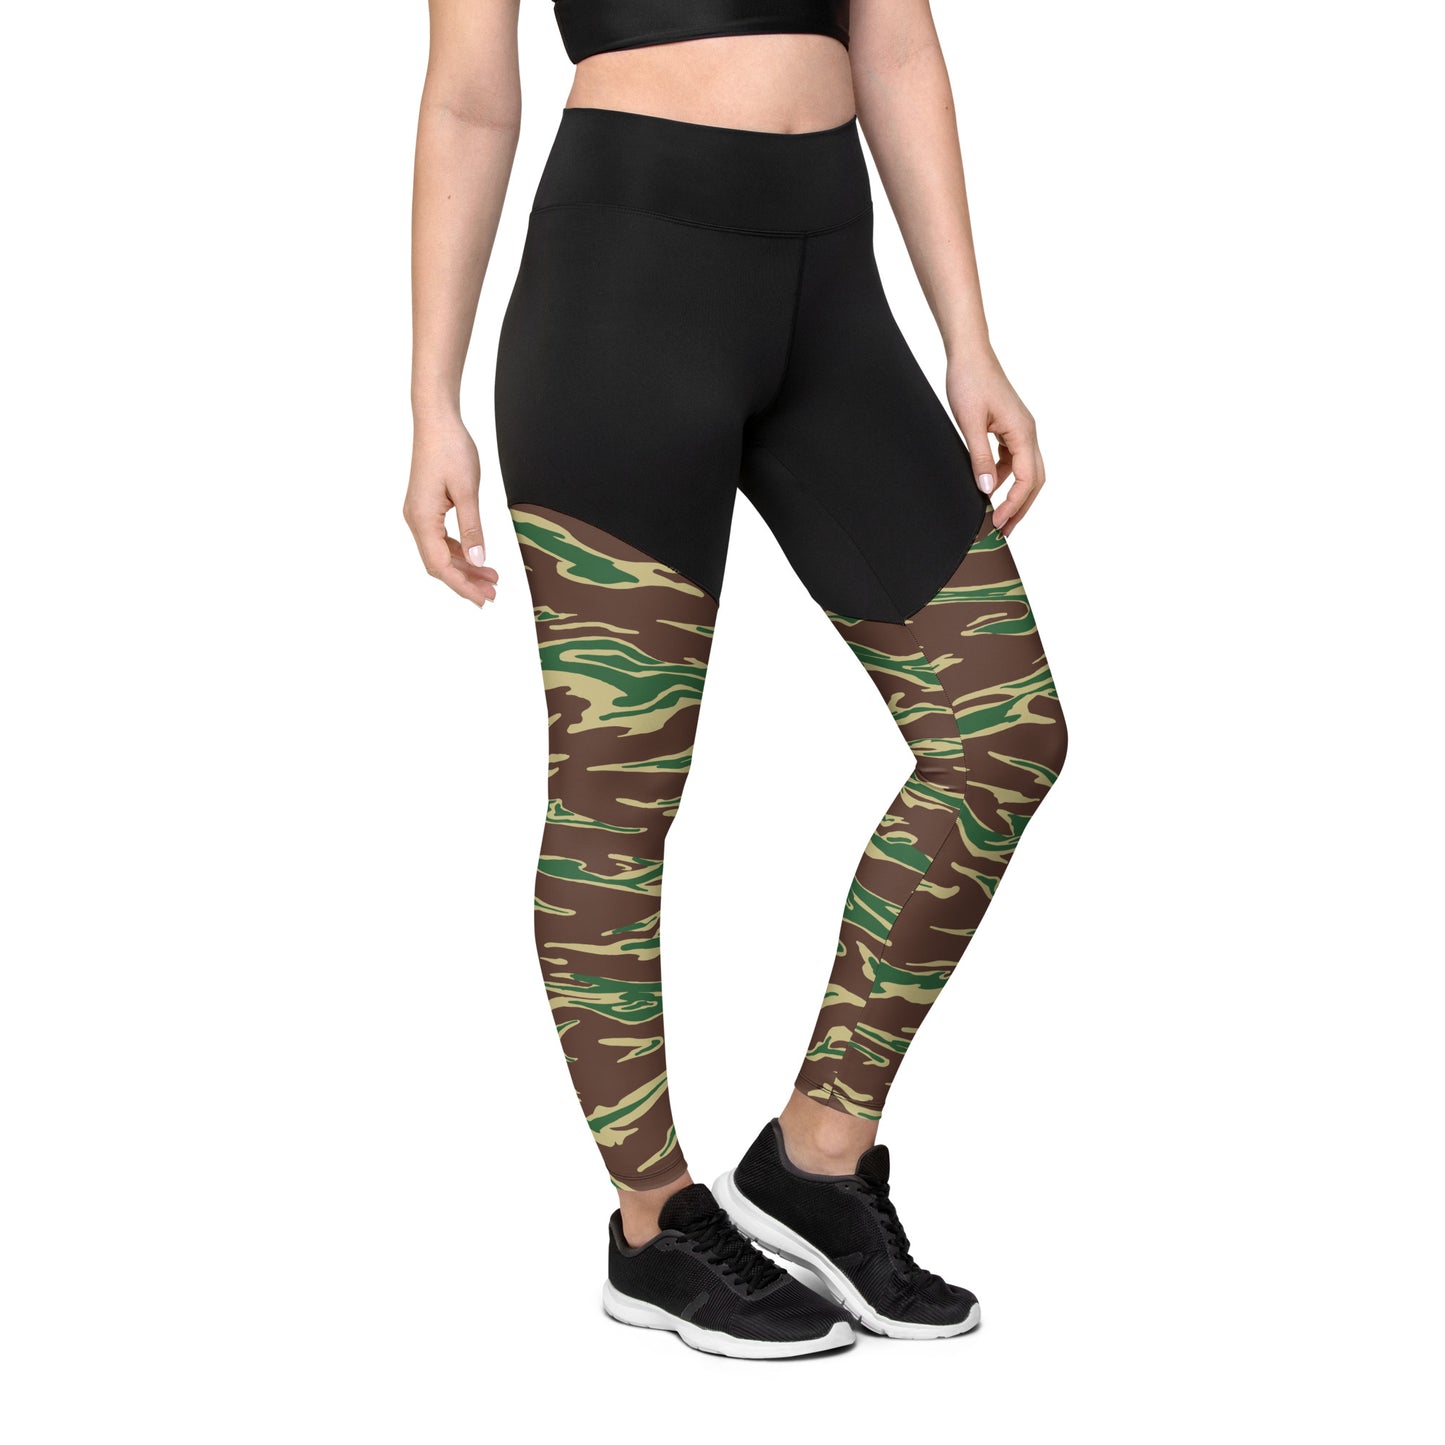 Sports Leggings "Can't See Me Edition"